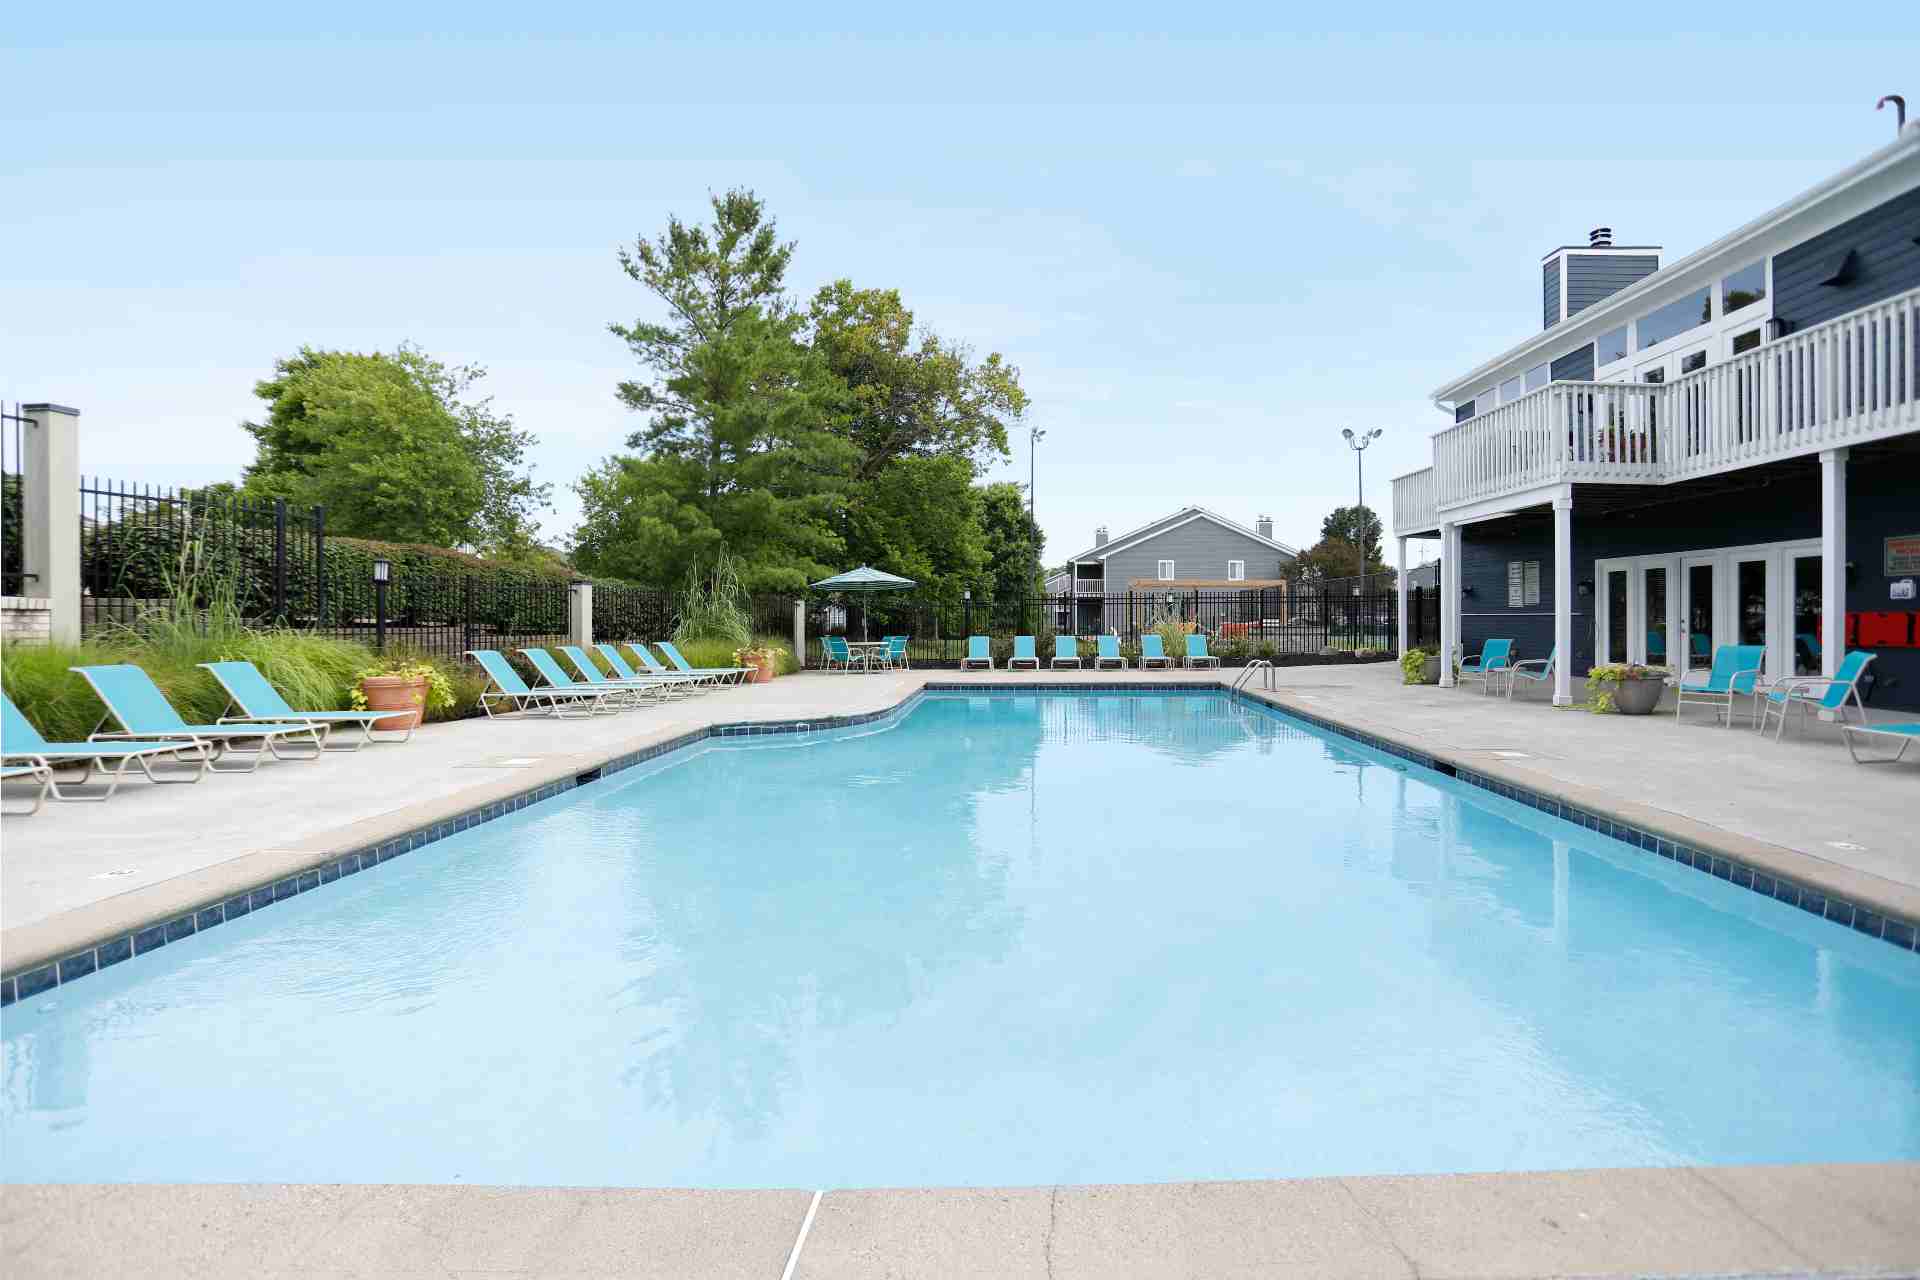 Clubhouse pool at Island Club Apartments.